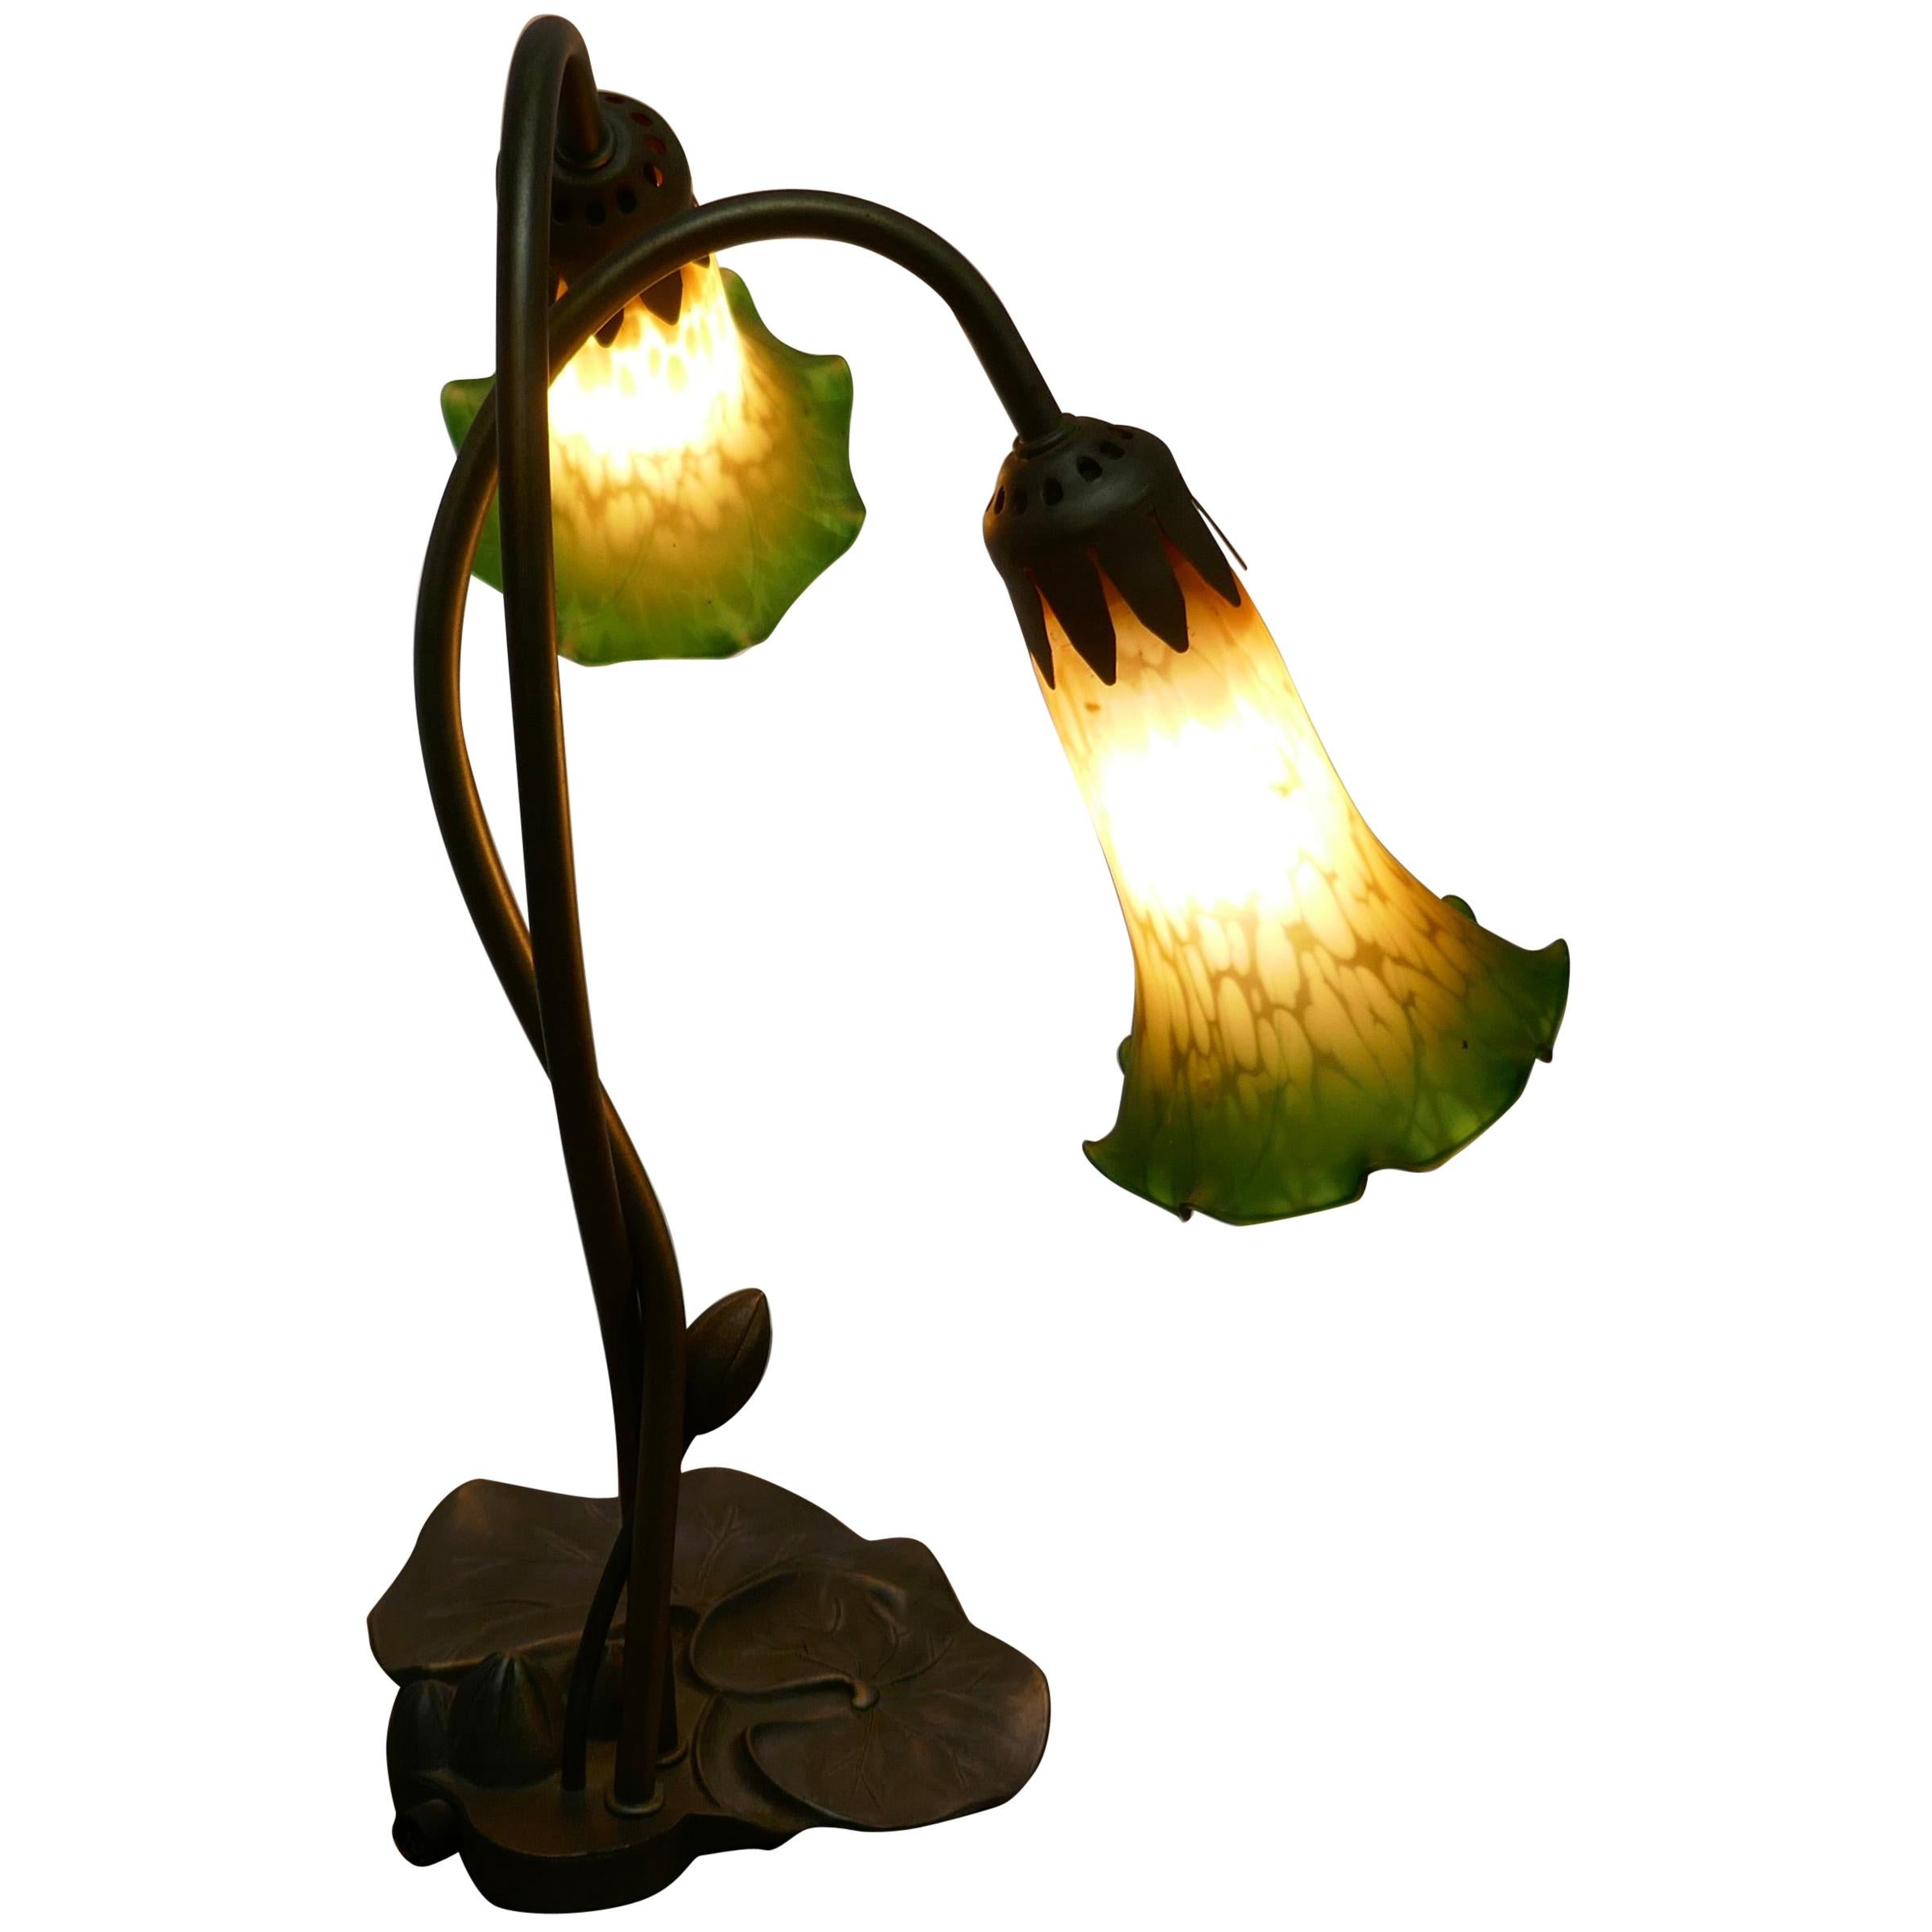 Lovely French Art Nouveau Style Lilly Pad Lamp